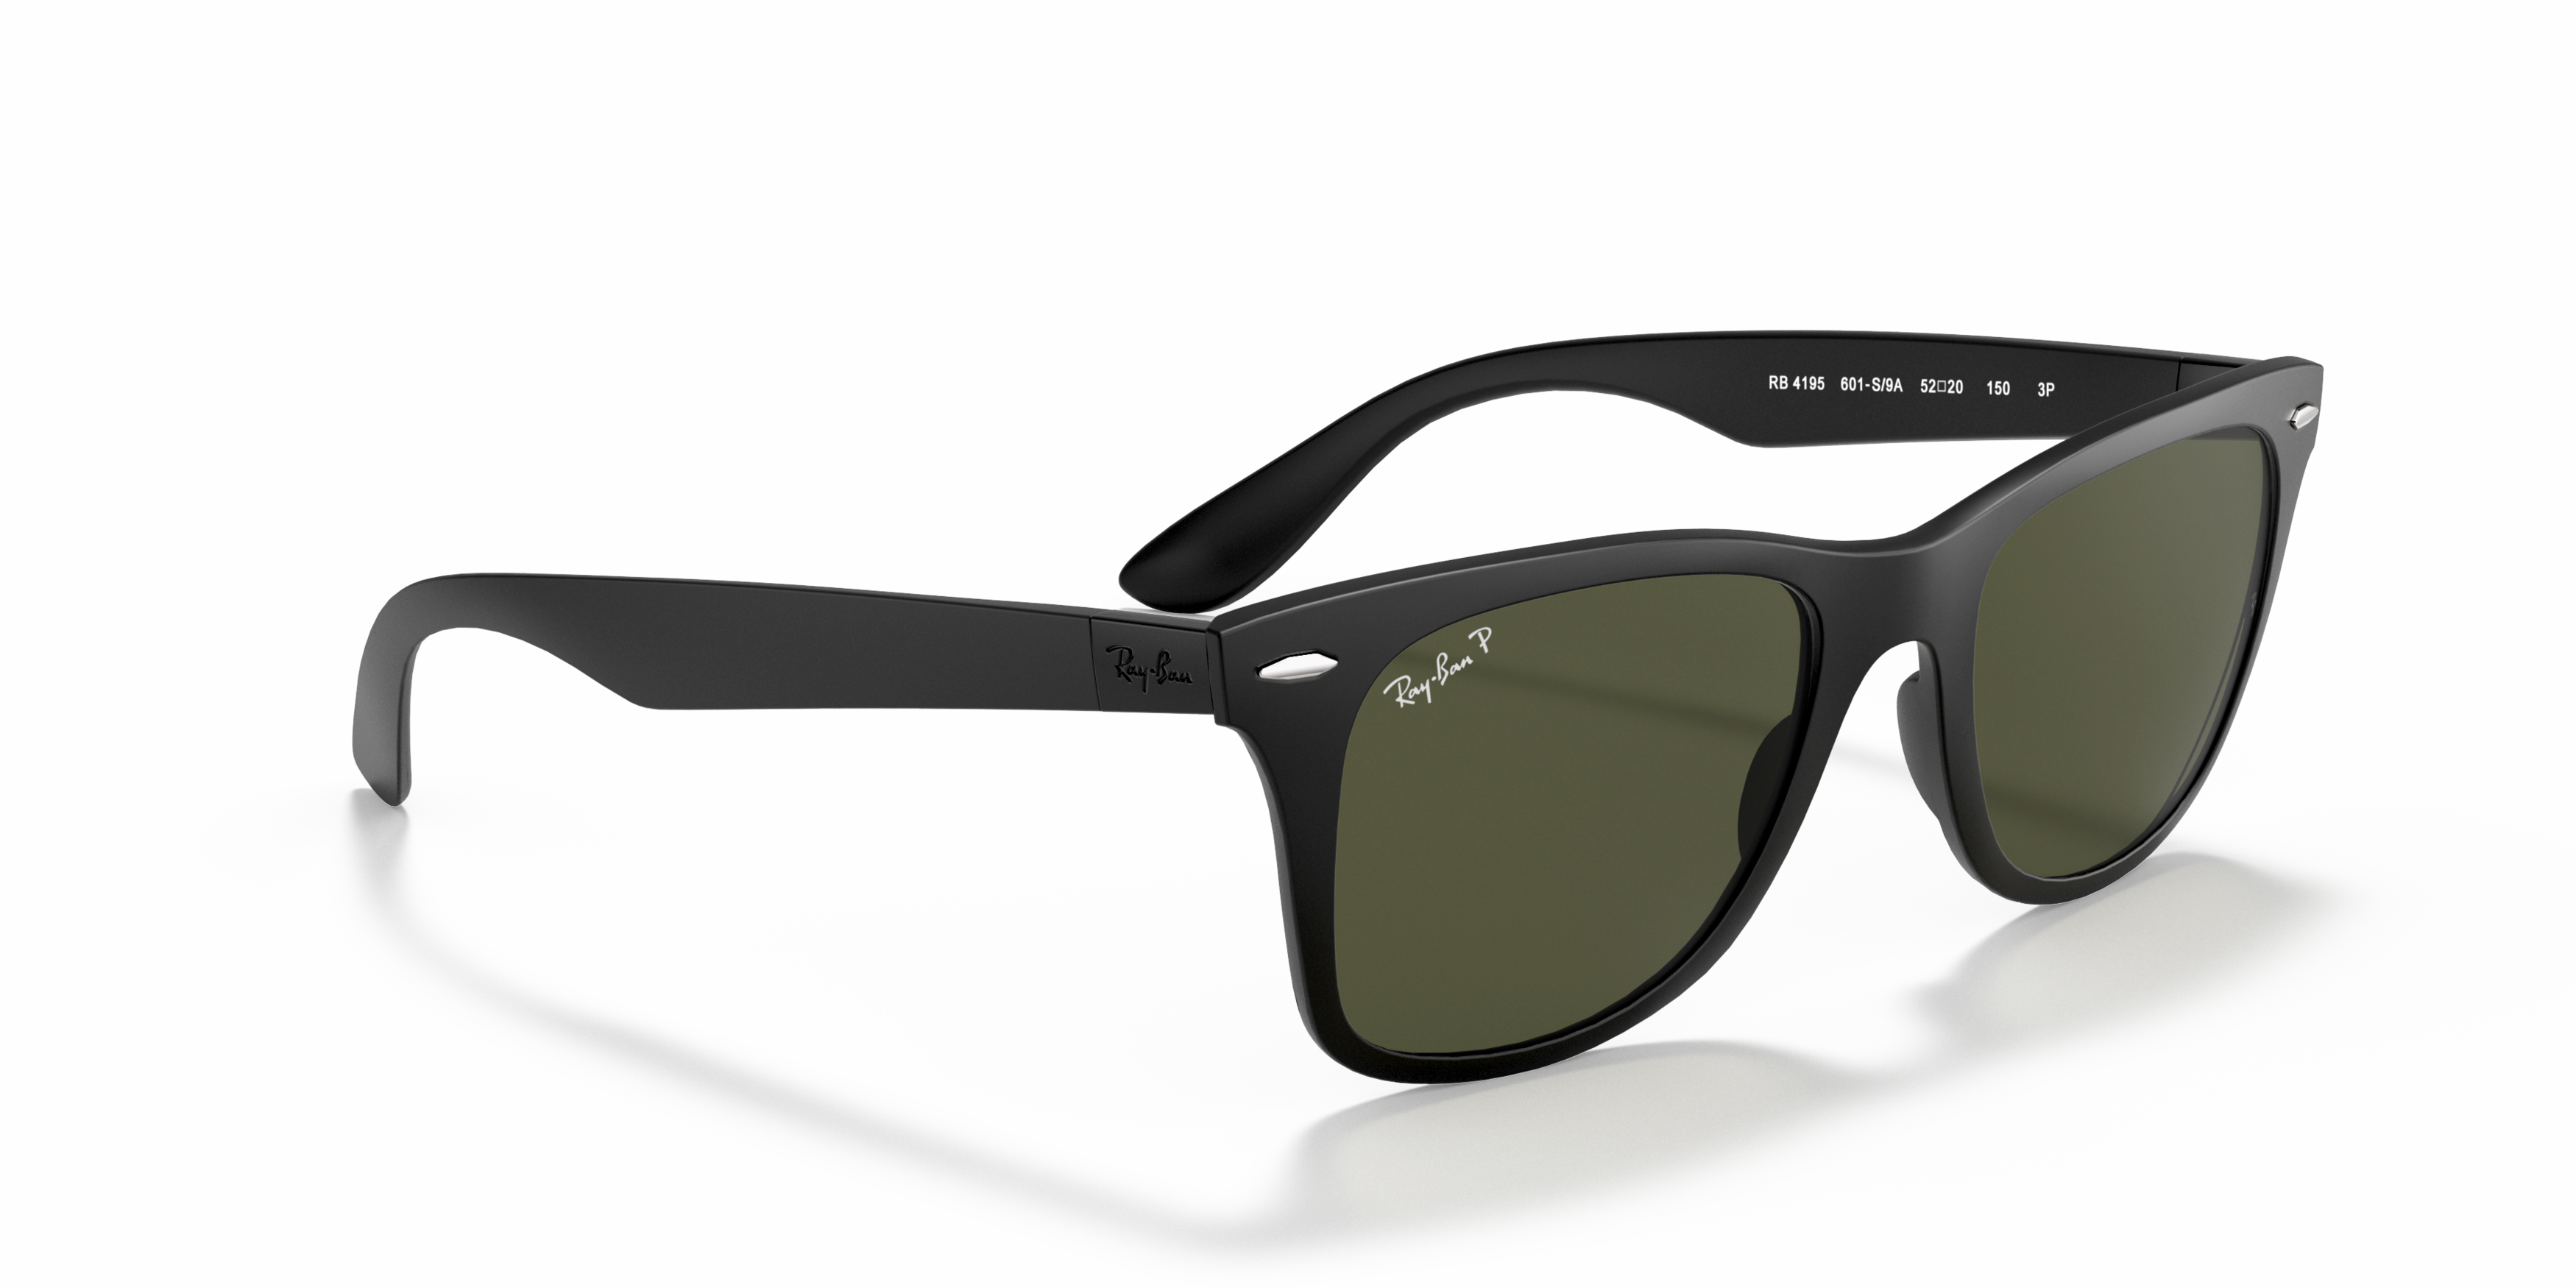 [products.image.angle_right01] Ray Ban Wayfarer Liteforce 0RB4195 601S9A